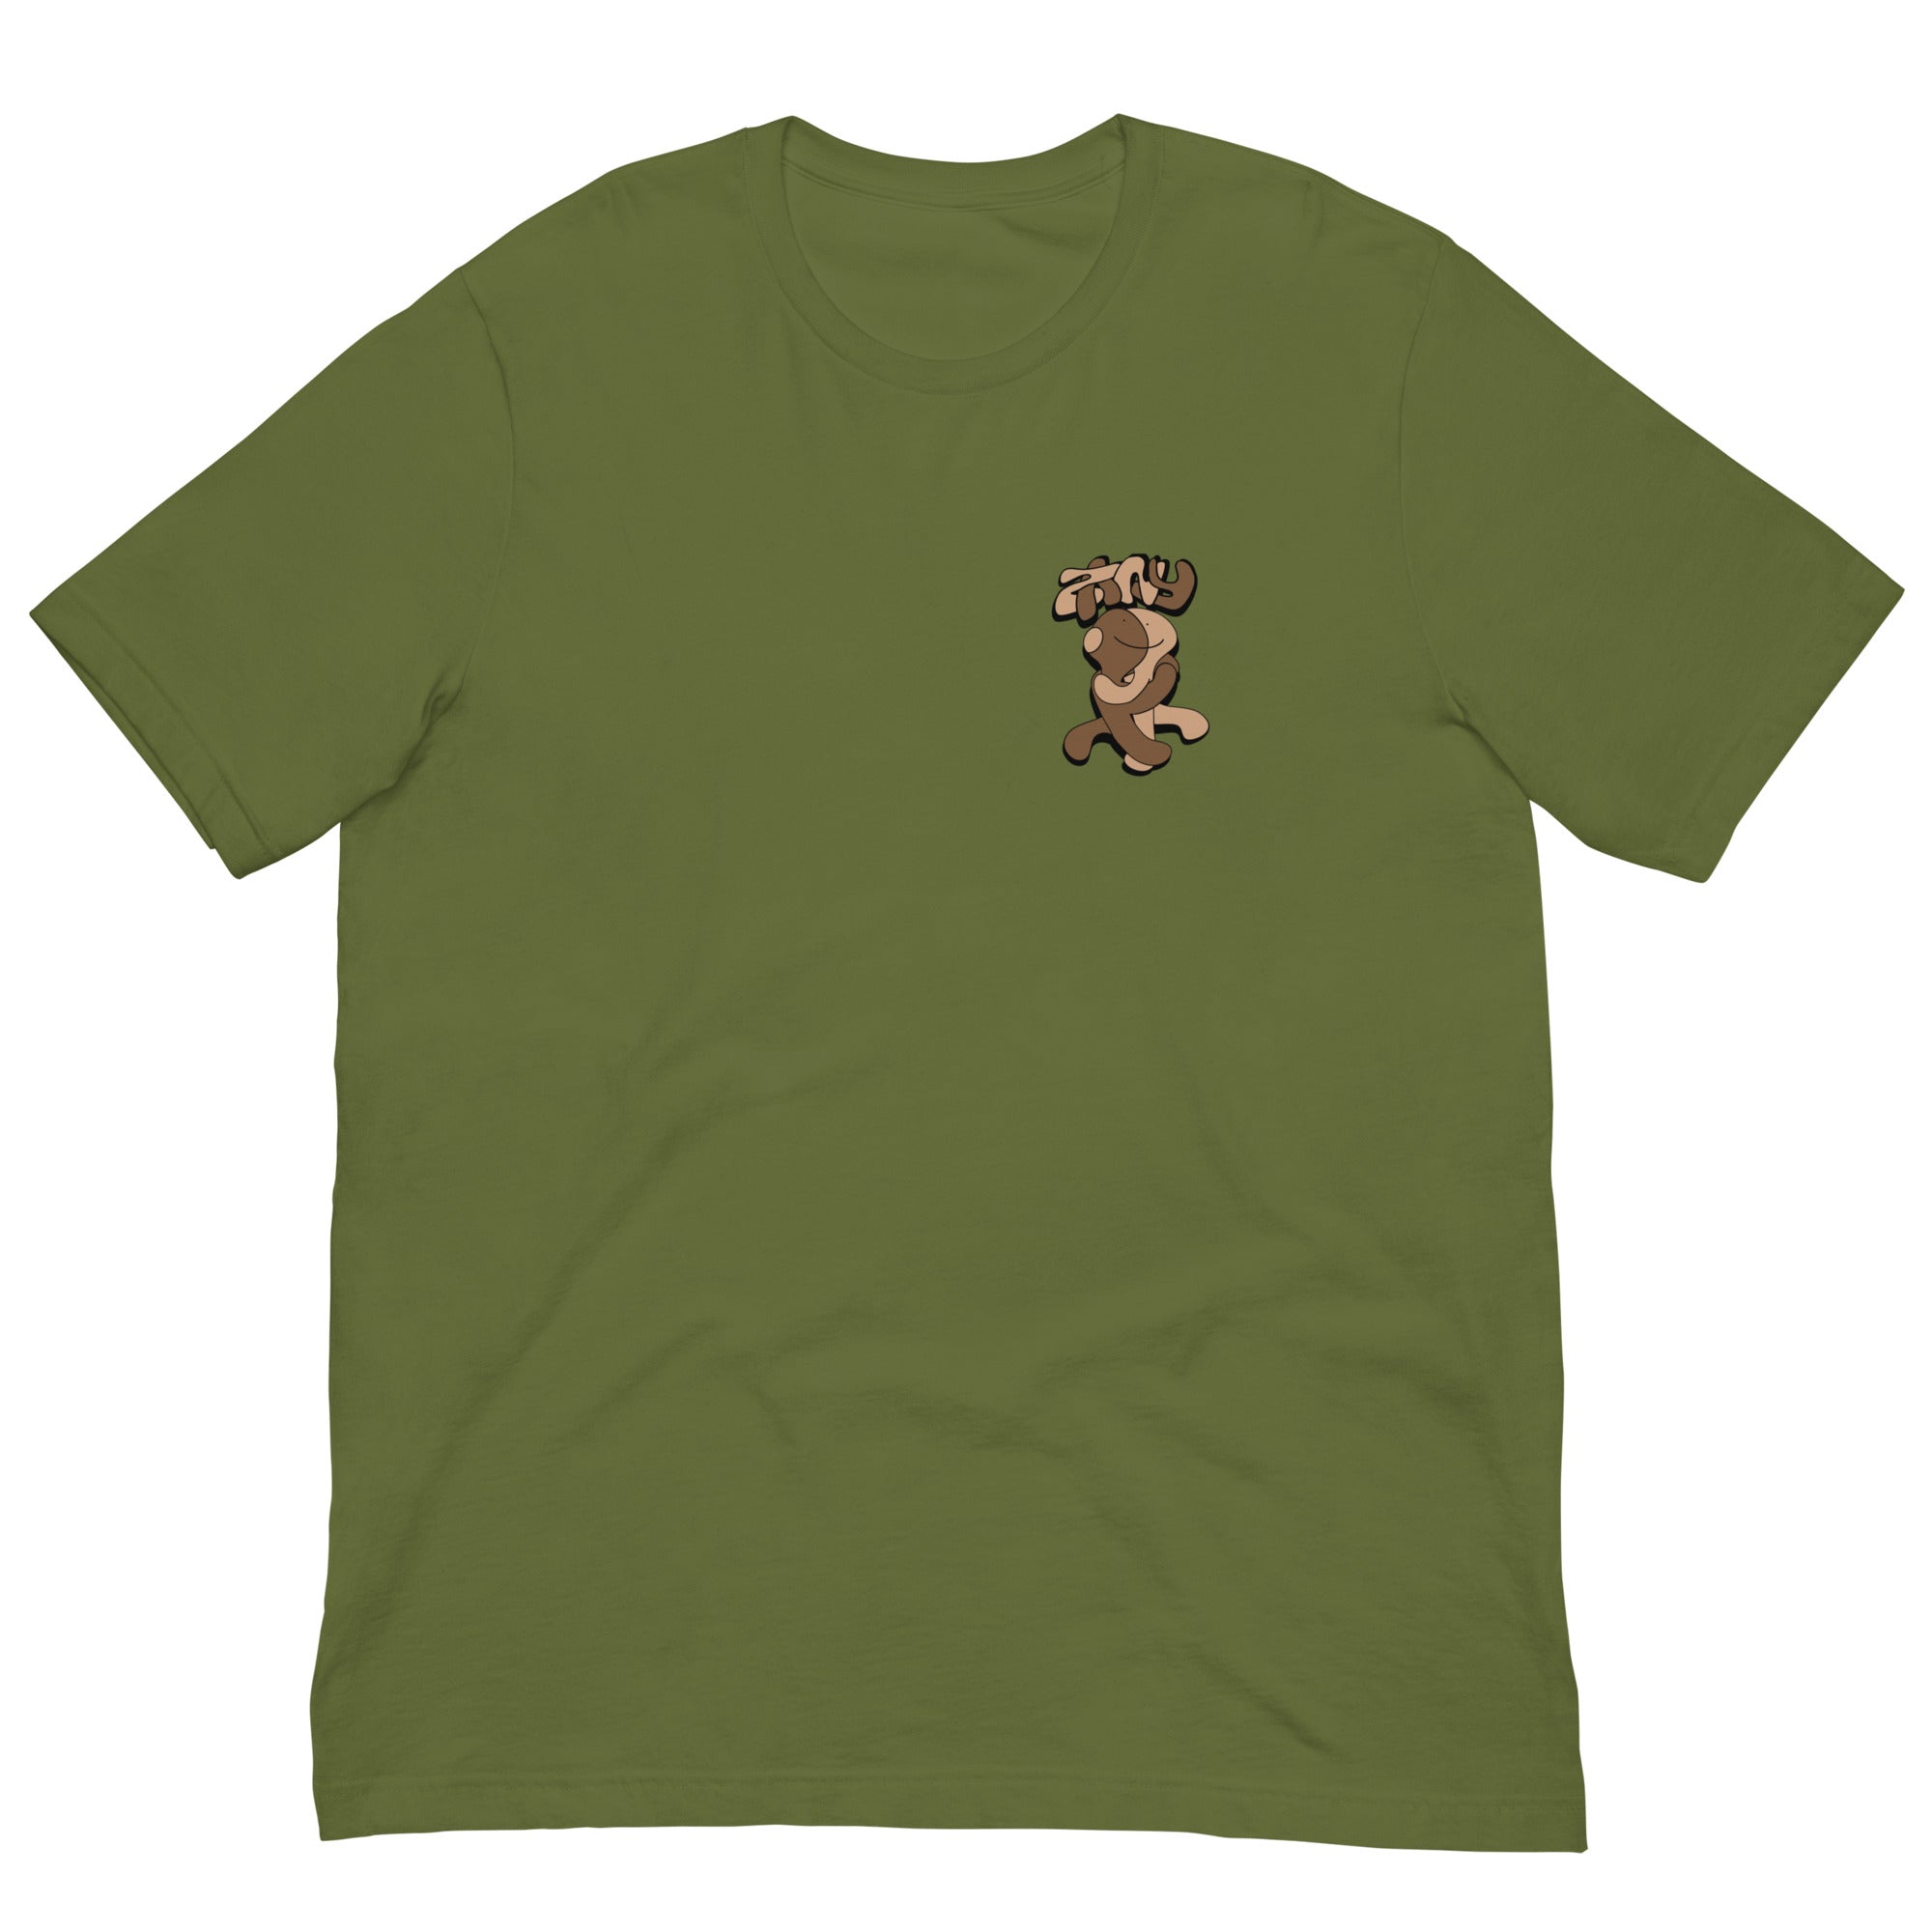 unisex-staple-t-shirt-olive-front-66446a239bc11.jpg